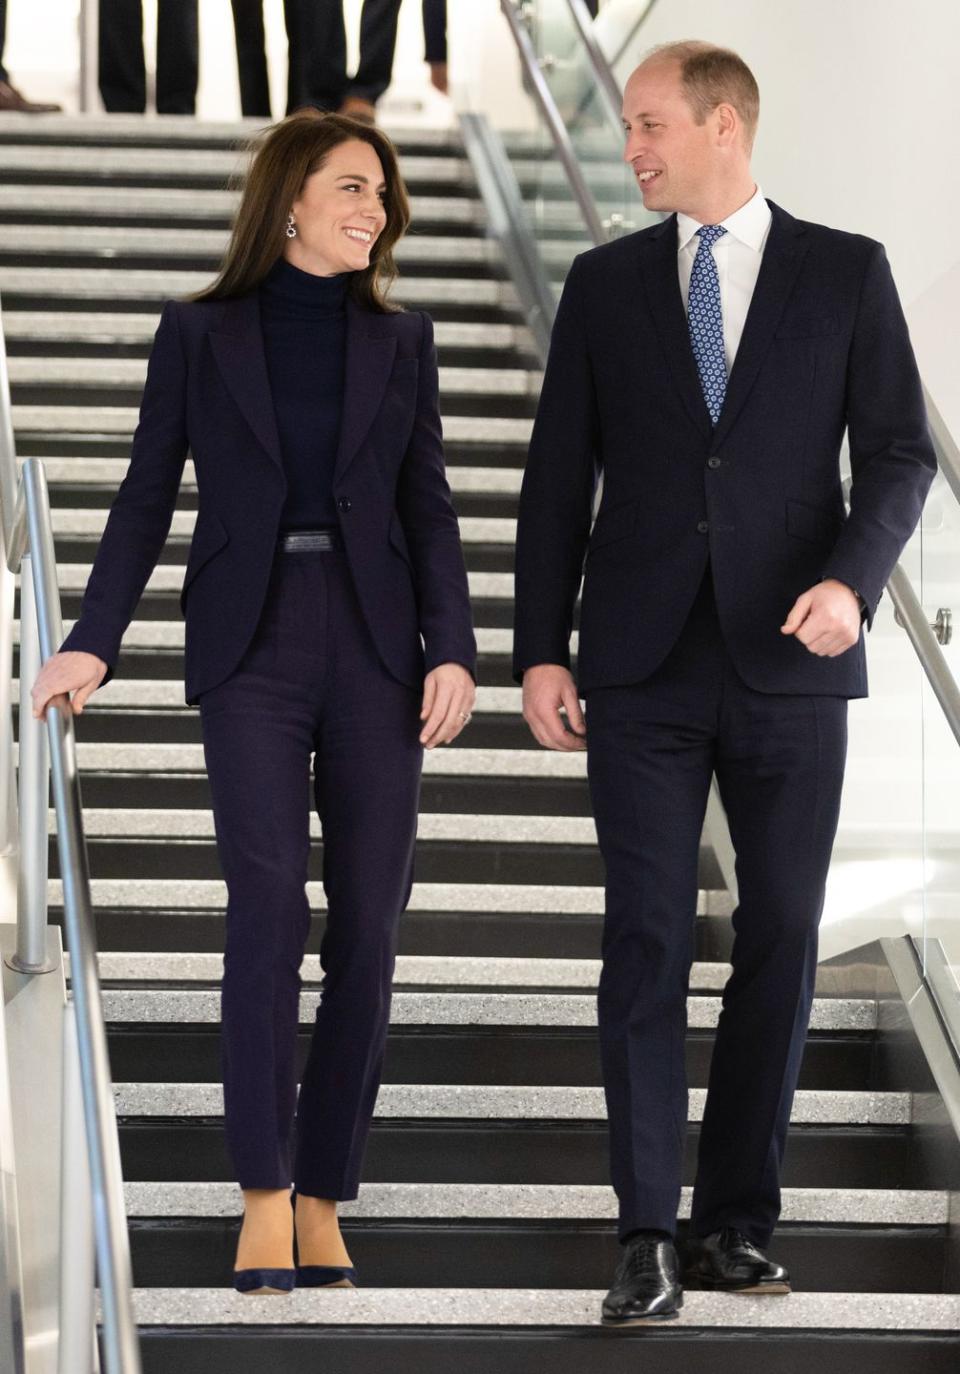 <p>The Prince and Princess of Wales arrive together to America at Boston's Logan International Airport to begin their involvements with the Earthshot Prize Awards. </p>